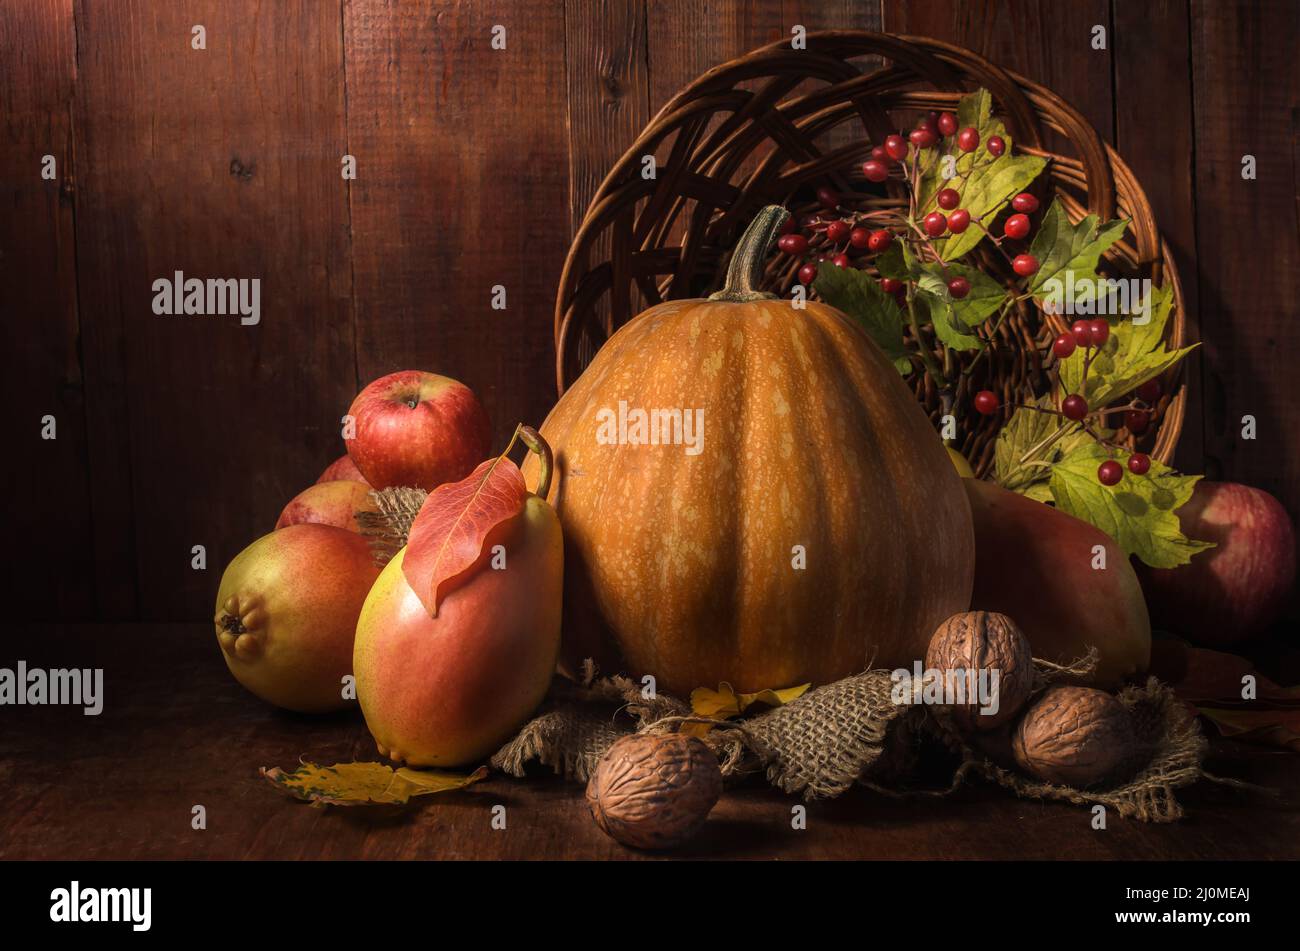 Pumpkin and fruits in bulk on a dark wooden background in a rustic style Stock Photo